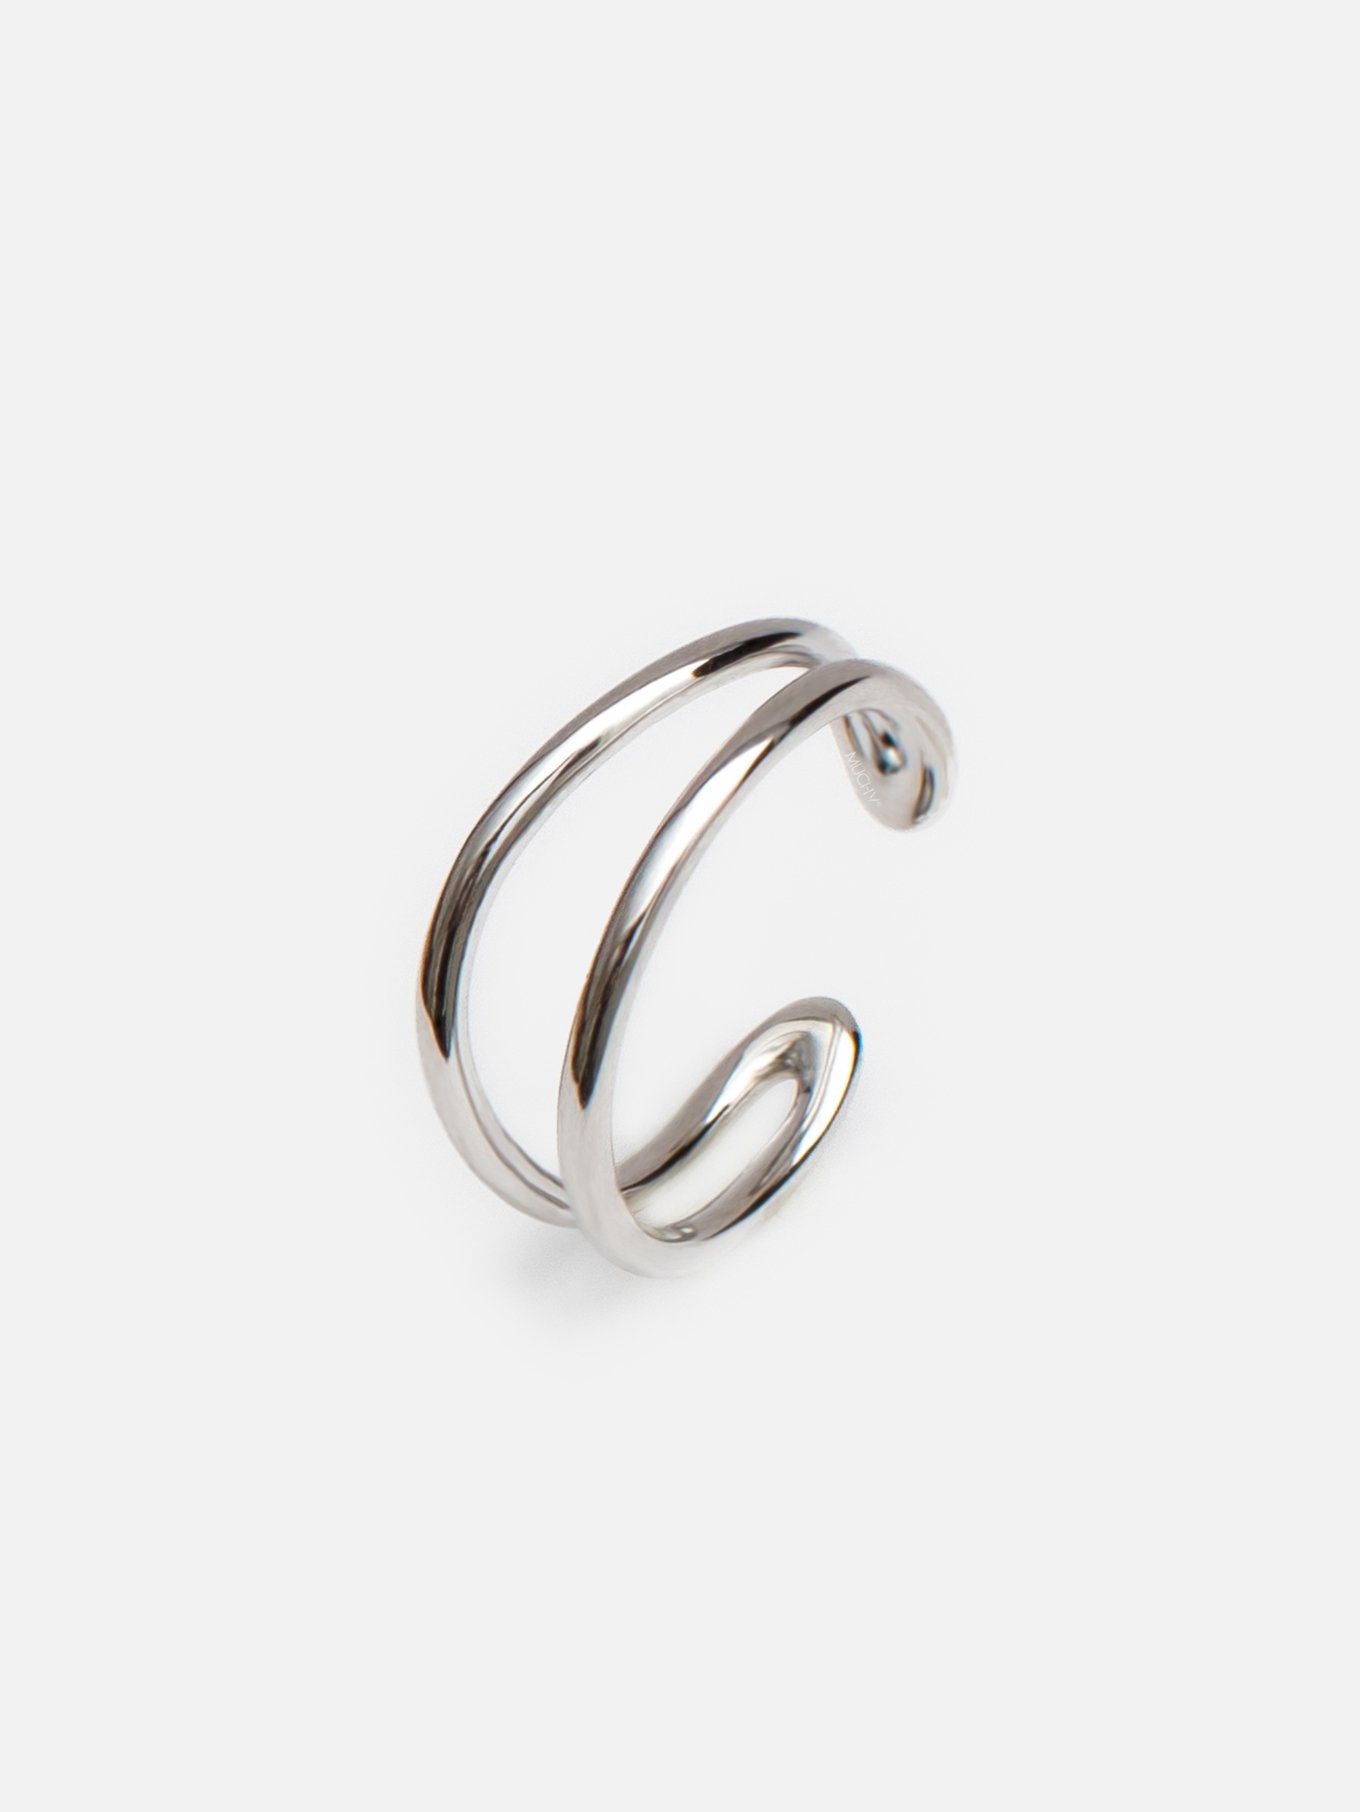 Silver Adjustable Wave Ring (18ct White Gold Plated 925 Sterling Silver) - Muchv Jewellery